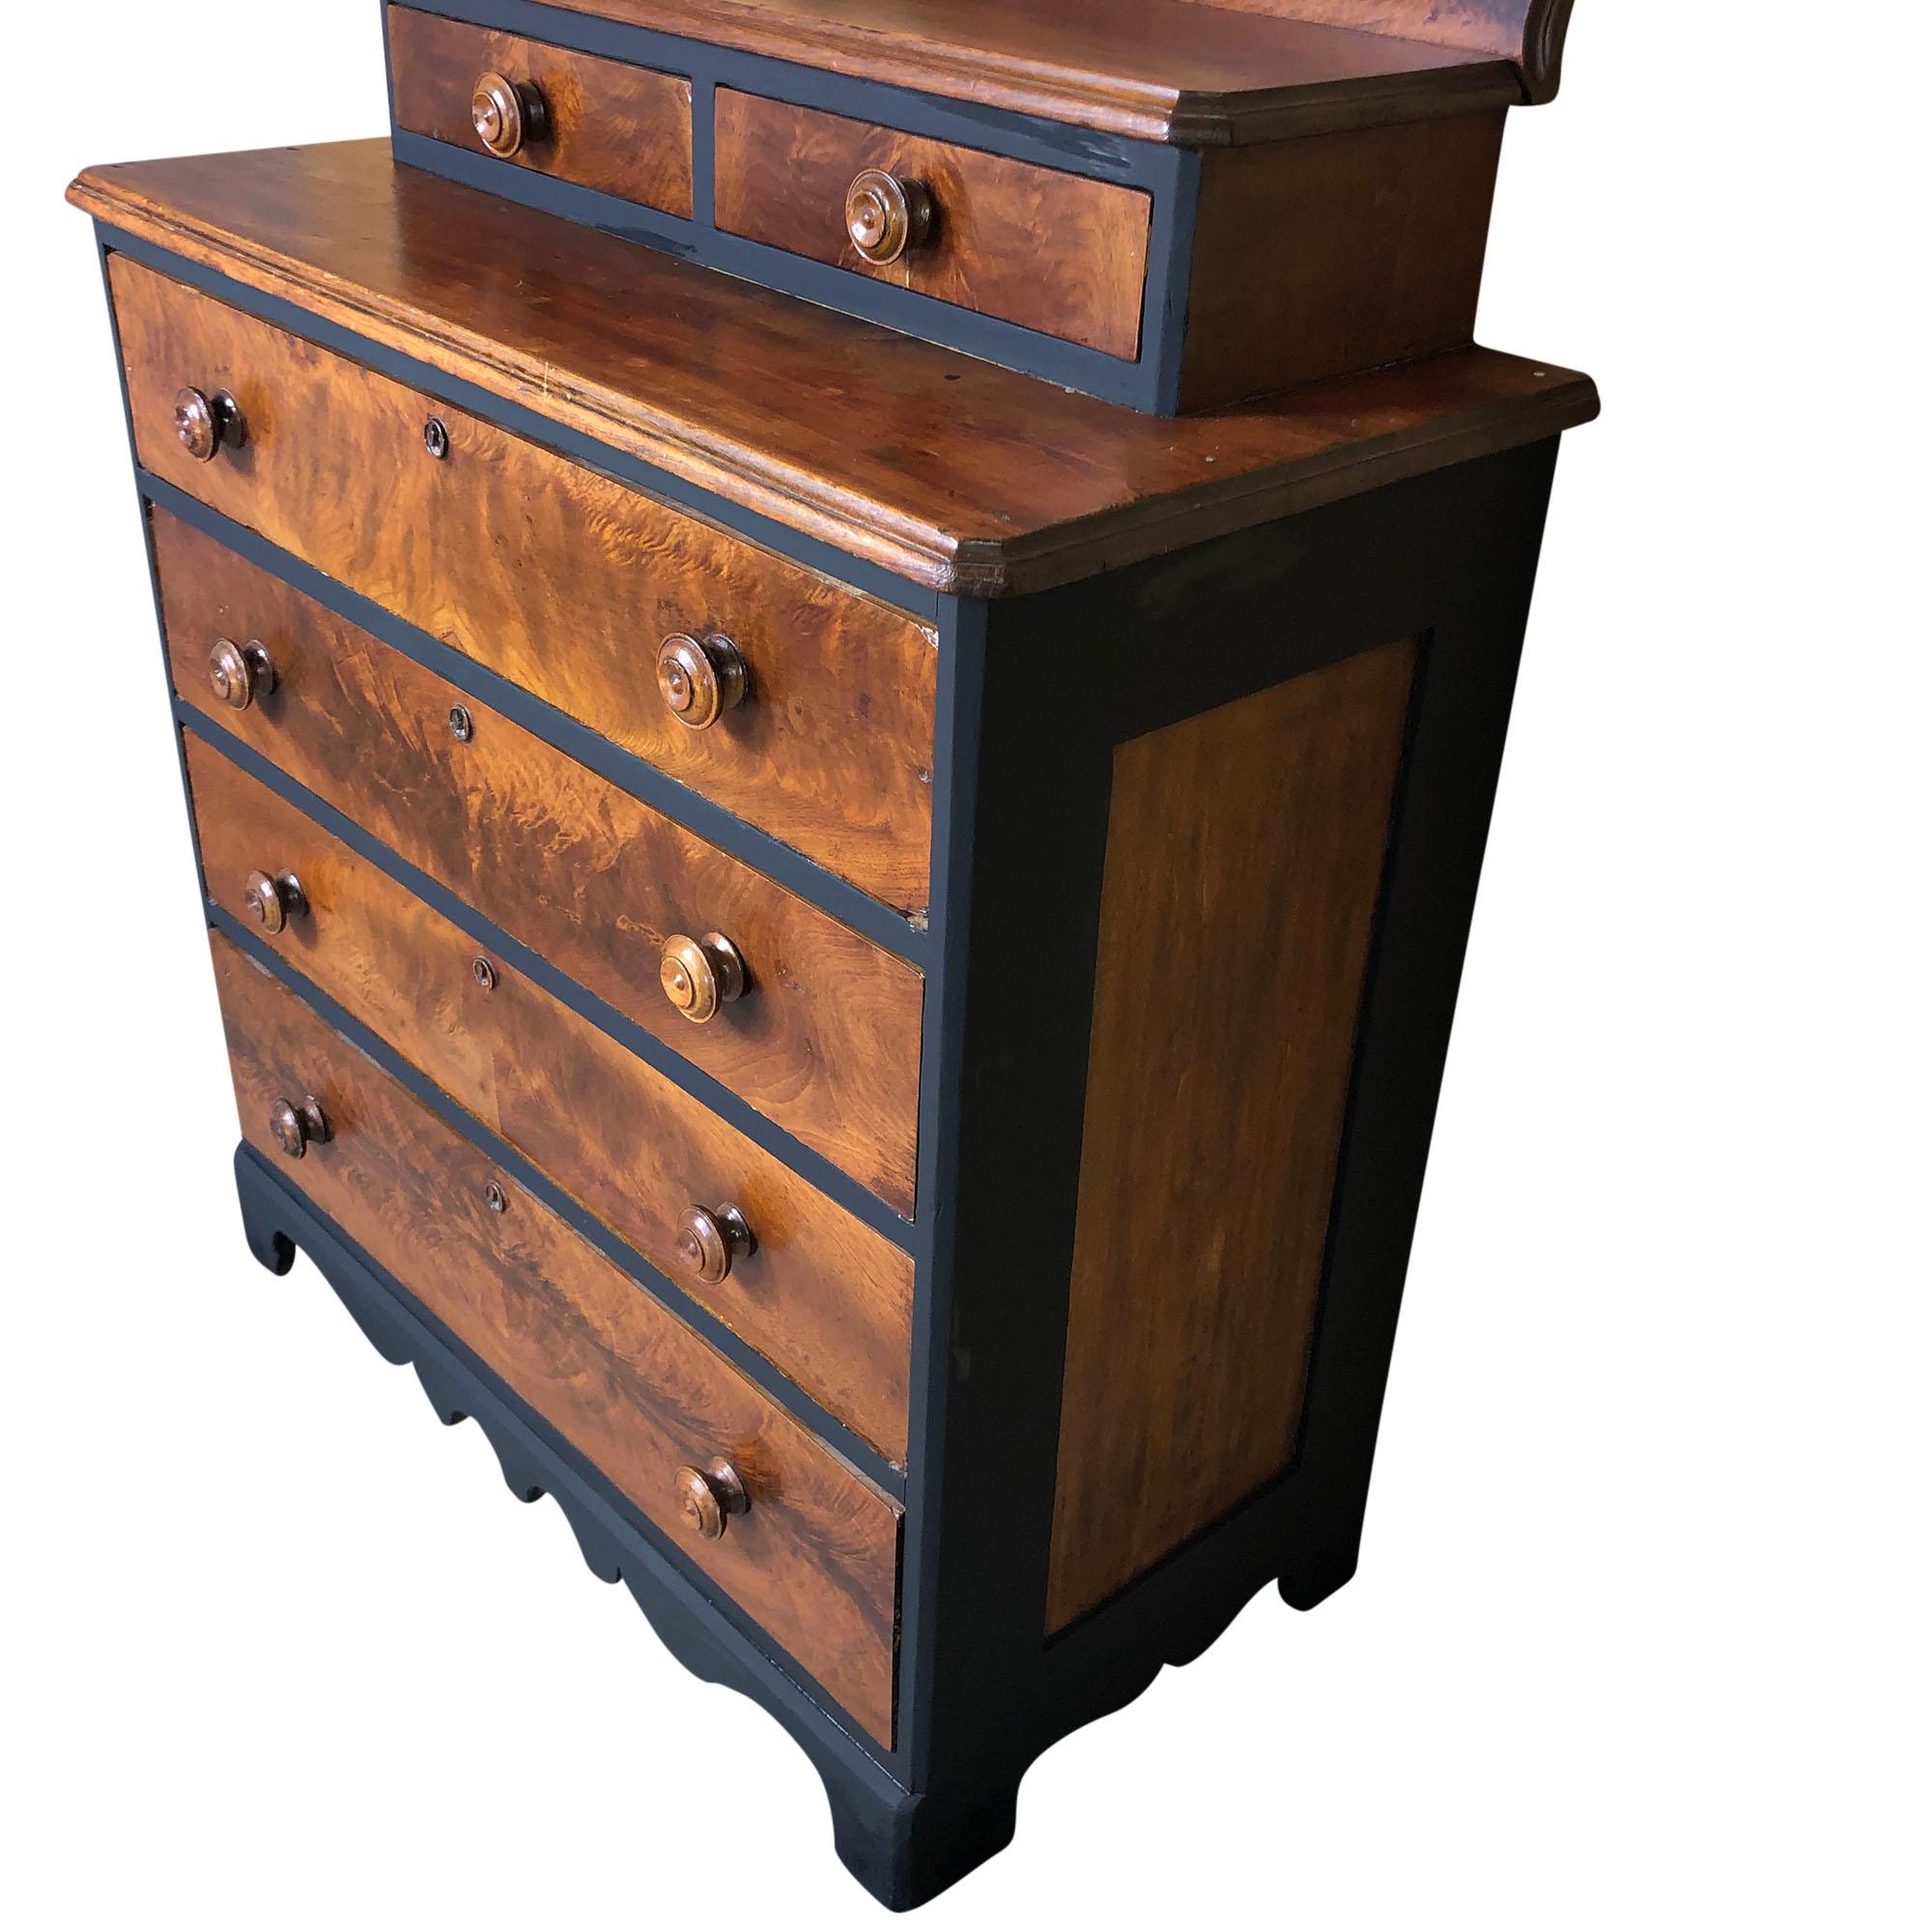 Solid wood dresser with four full drawers and two smaller drawers on top has been updated to include black accents. The stunning front drawer fronts reflect the beautiful wood grain. Features round drawer pulls and understated decorative piece on